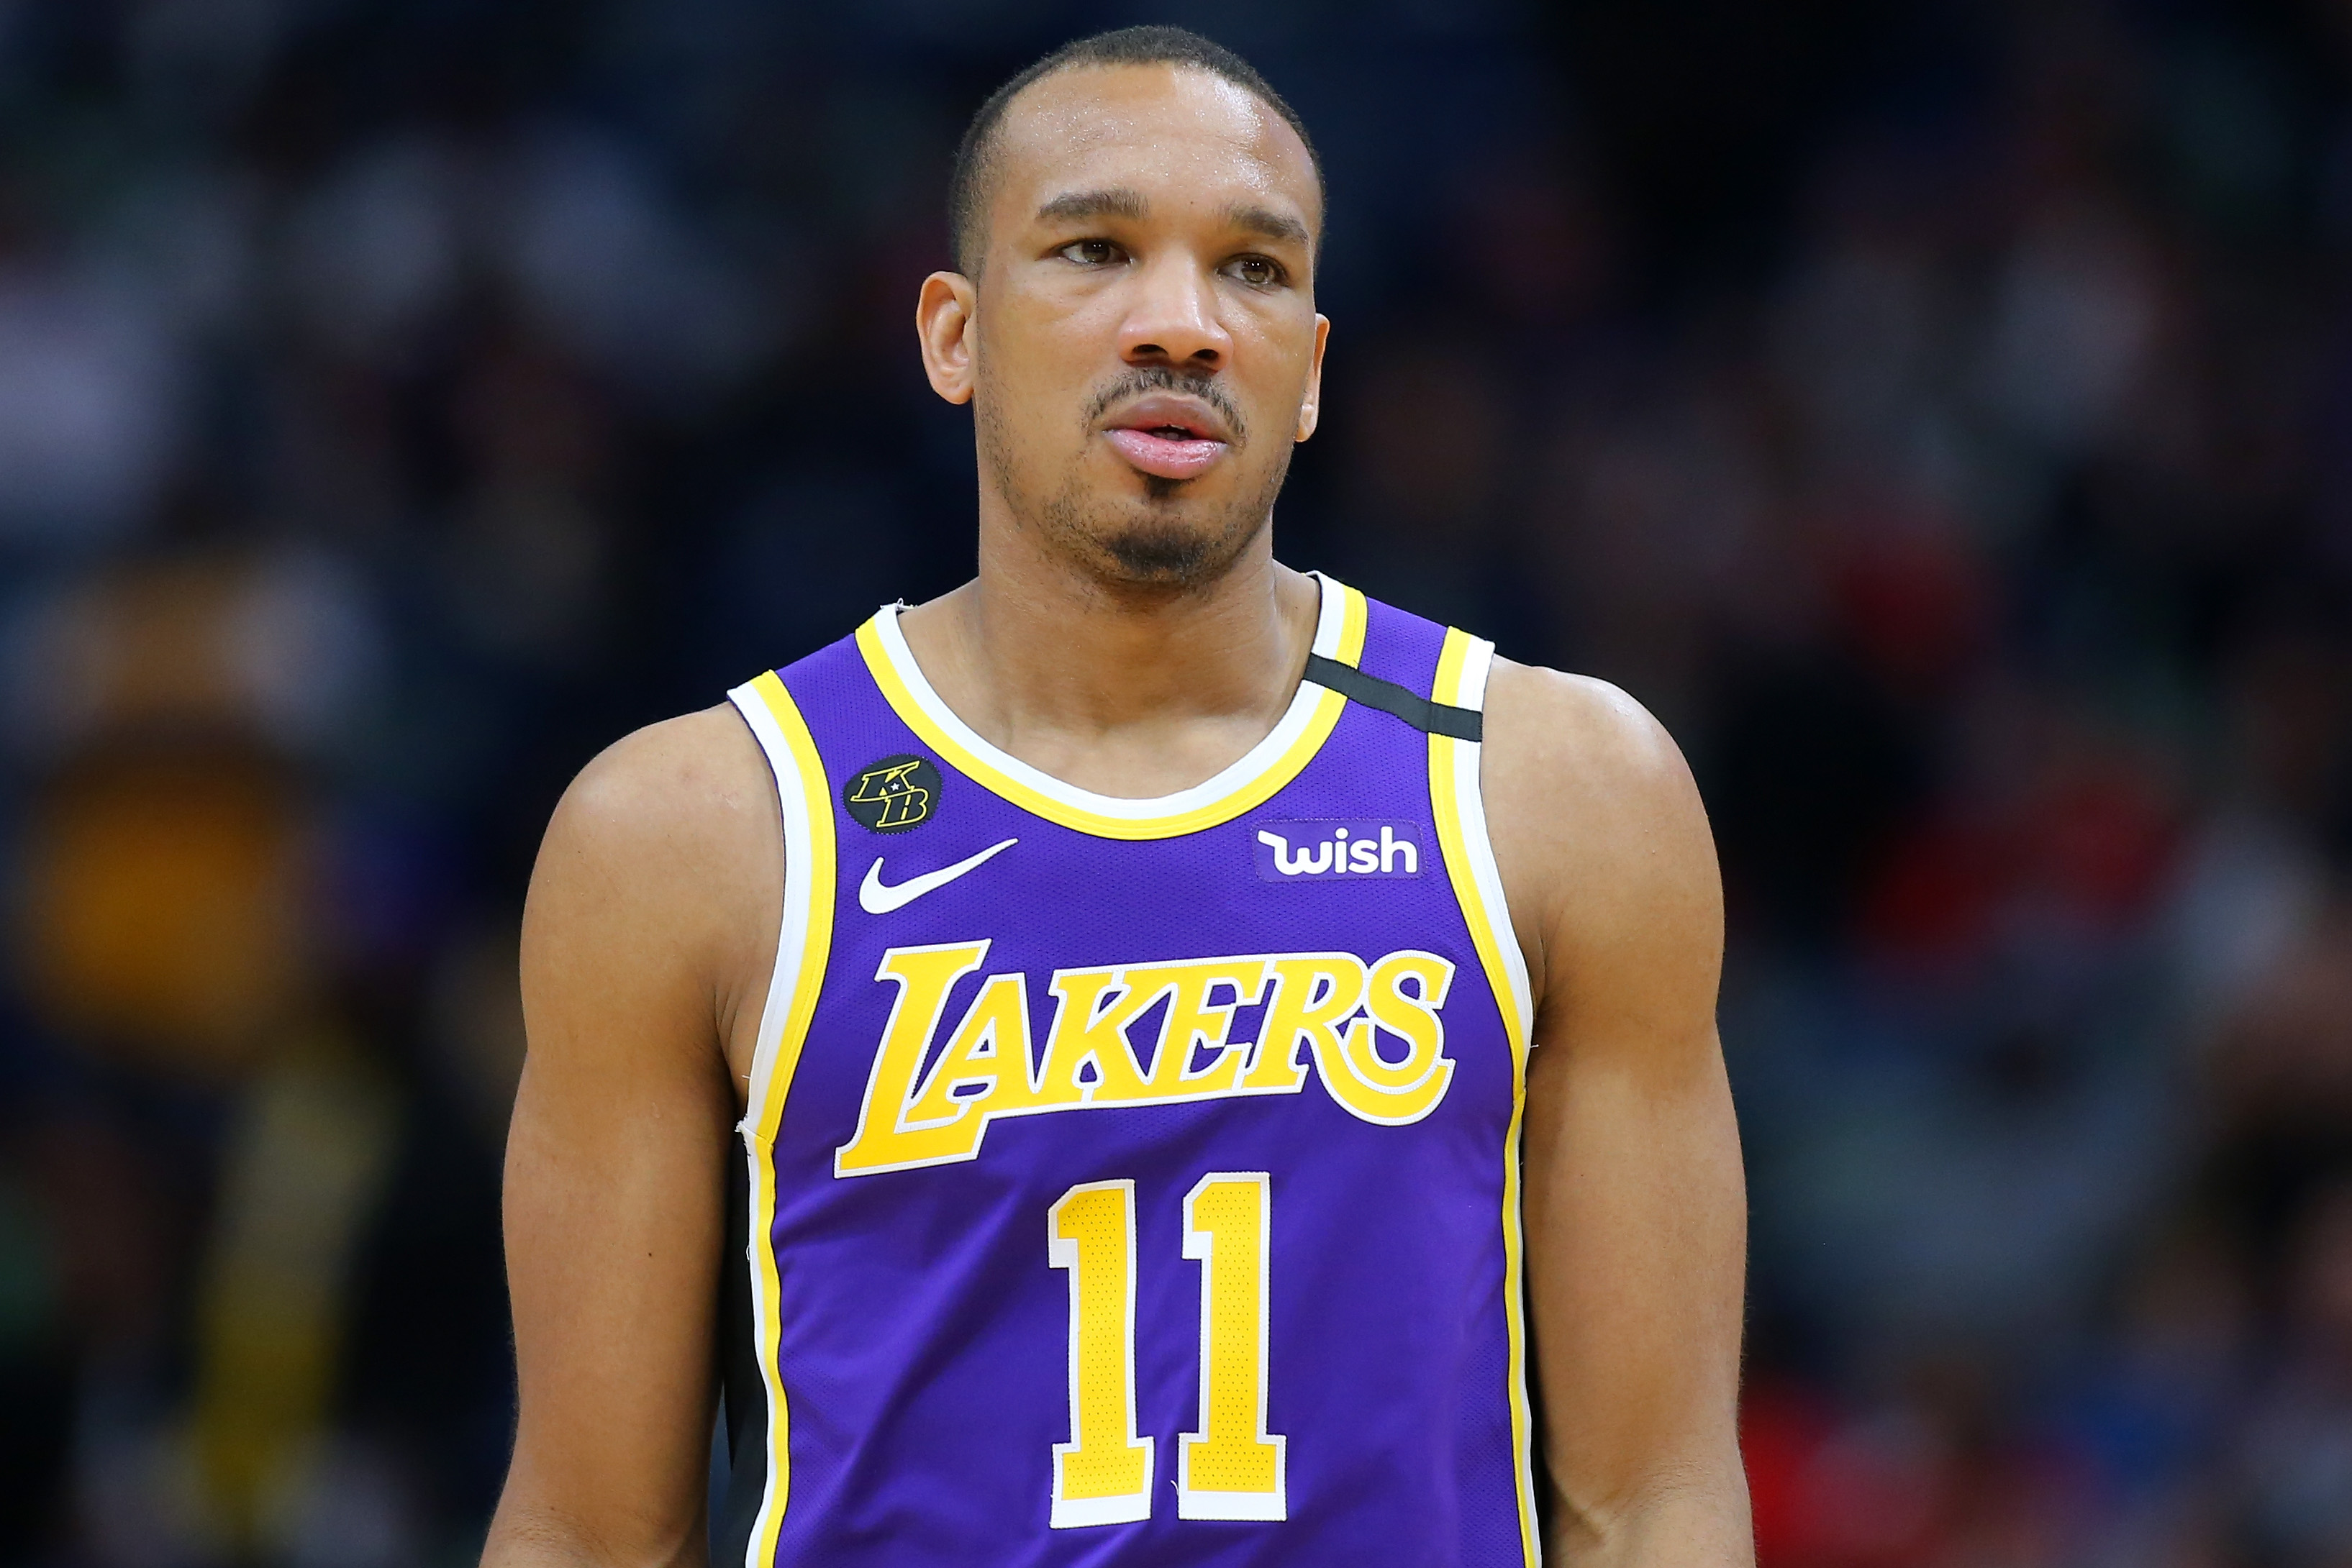 Lakers' Avery Bradley Out of NBA Return 